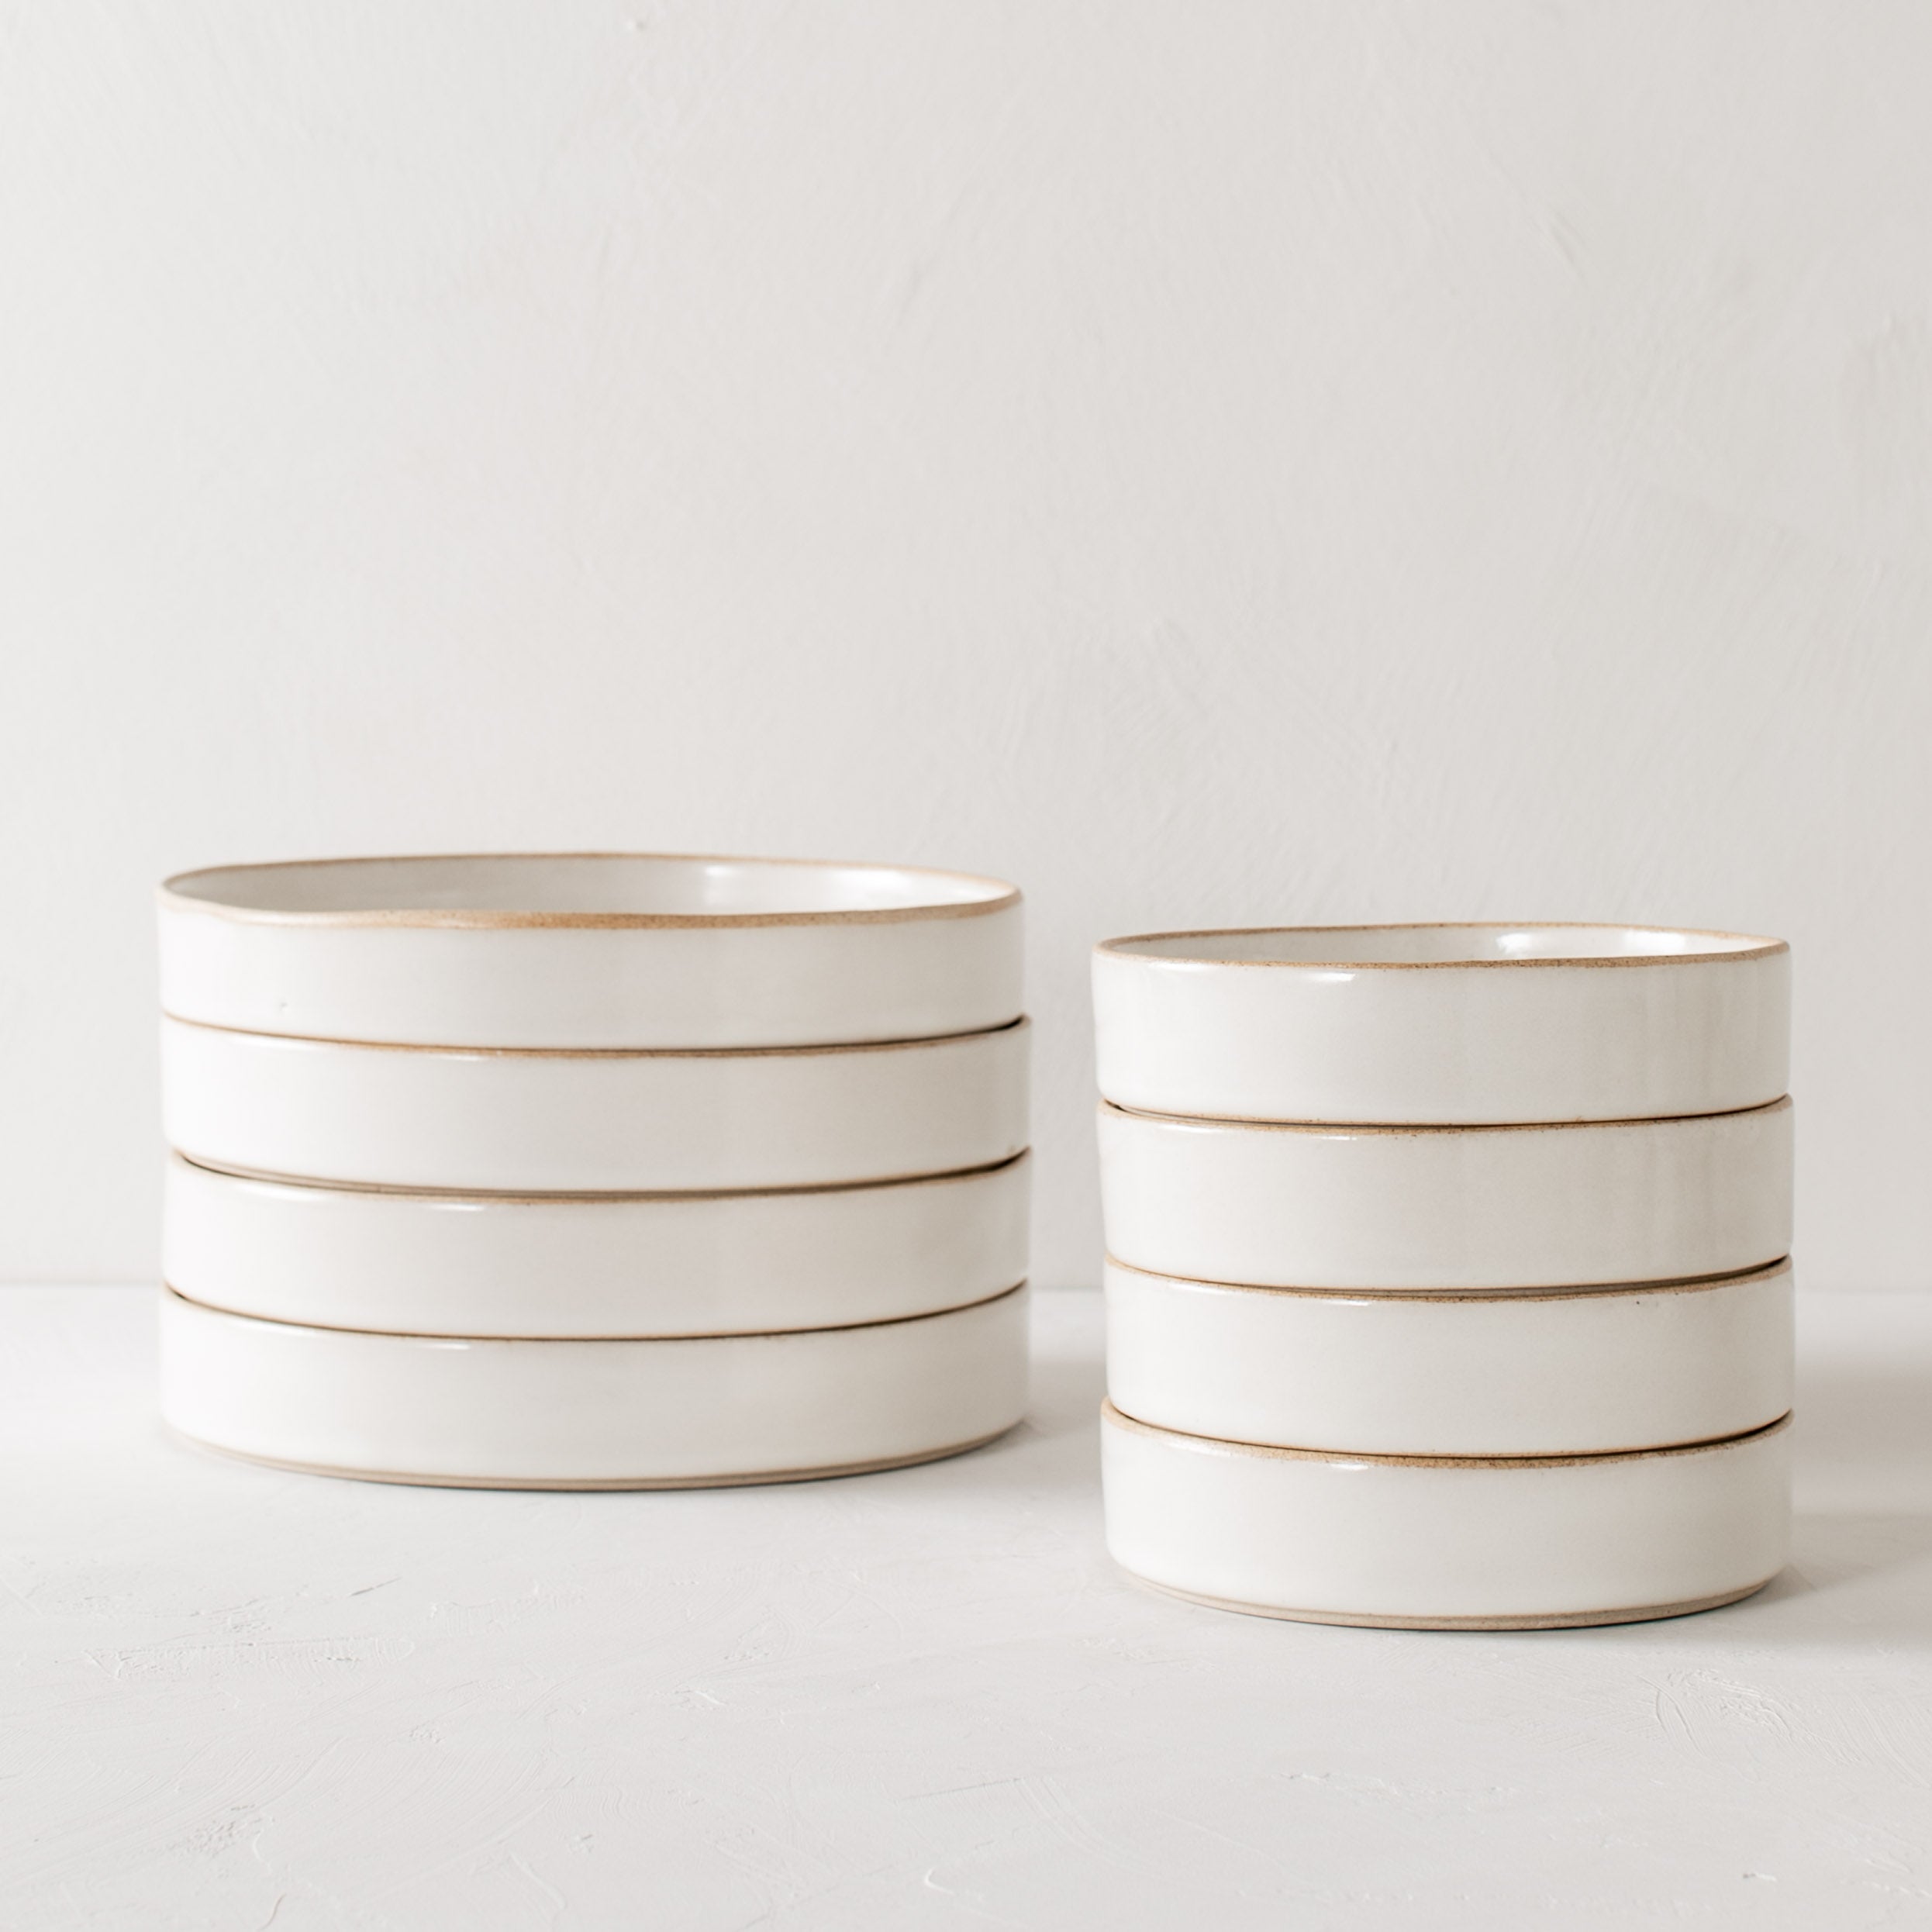 Two stacks of minimal dishes. From left to right, stack of four dinner dishes, stack of salad dishes. Dishes have tall walls with exposed stoneware rims and bases. Handmade ceramic dishes designed and sold by Convivial Production, Kansas City ceramics.